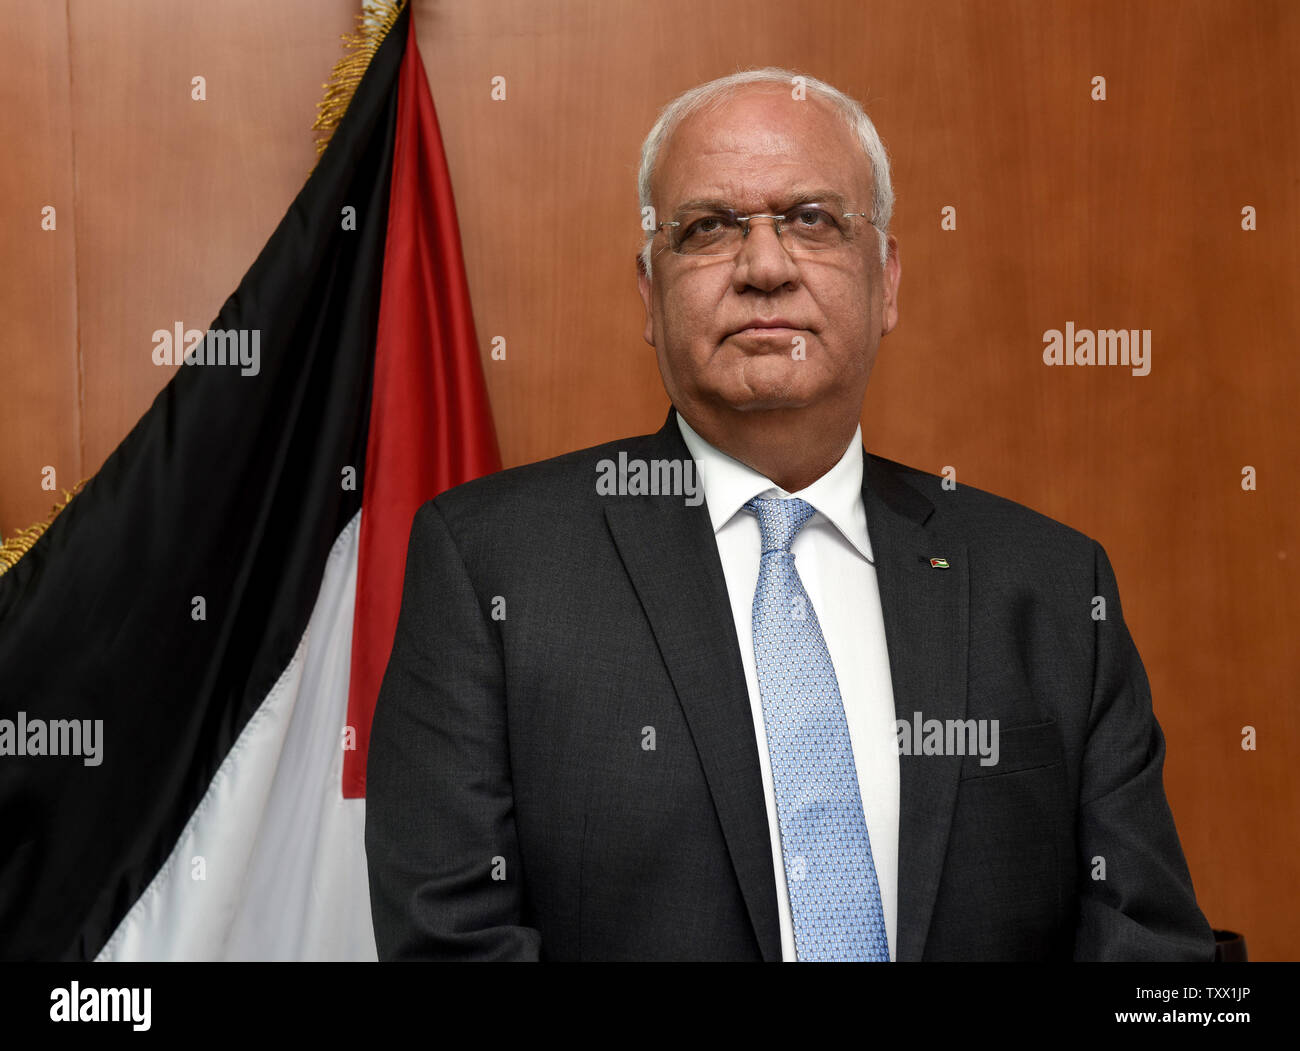 Dr. Saeb Erekat, General Secretariat of  the PLO, Palestinian Liberation Organization, in his office in the PLO headquarters in Ramallah, West Bank, September 17, 2018. According to a PLO statement, U.S. authorities told employees of the PLO office in Washington, D.C. to cease operations, close all bank accounts and vacate the premises by Oct. 13. The visas of the Palestinian Ambassador Husam Zomlot and his family were revoked by American authorities who demanded they  leave the country.   Photo by Debbie Hill/UPI Stock Photo